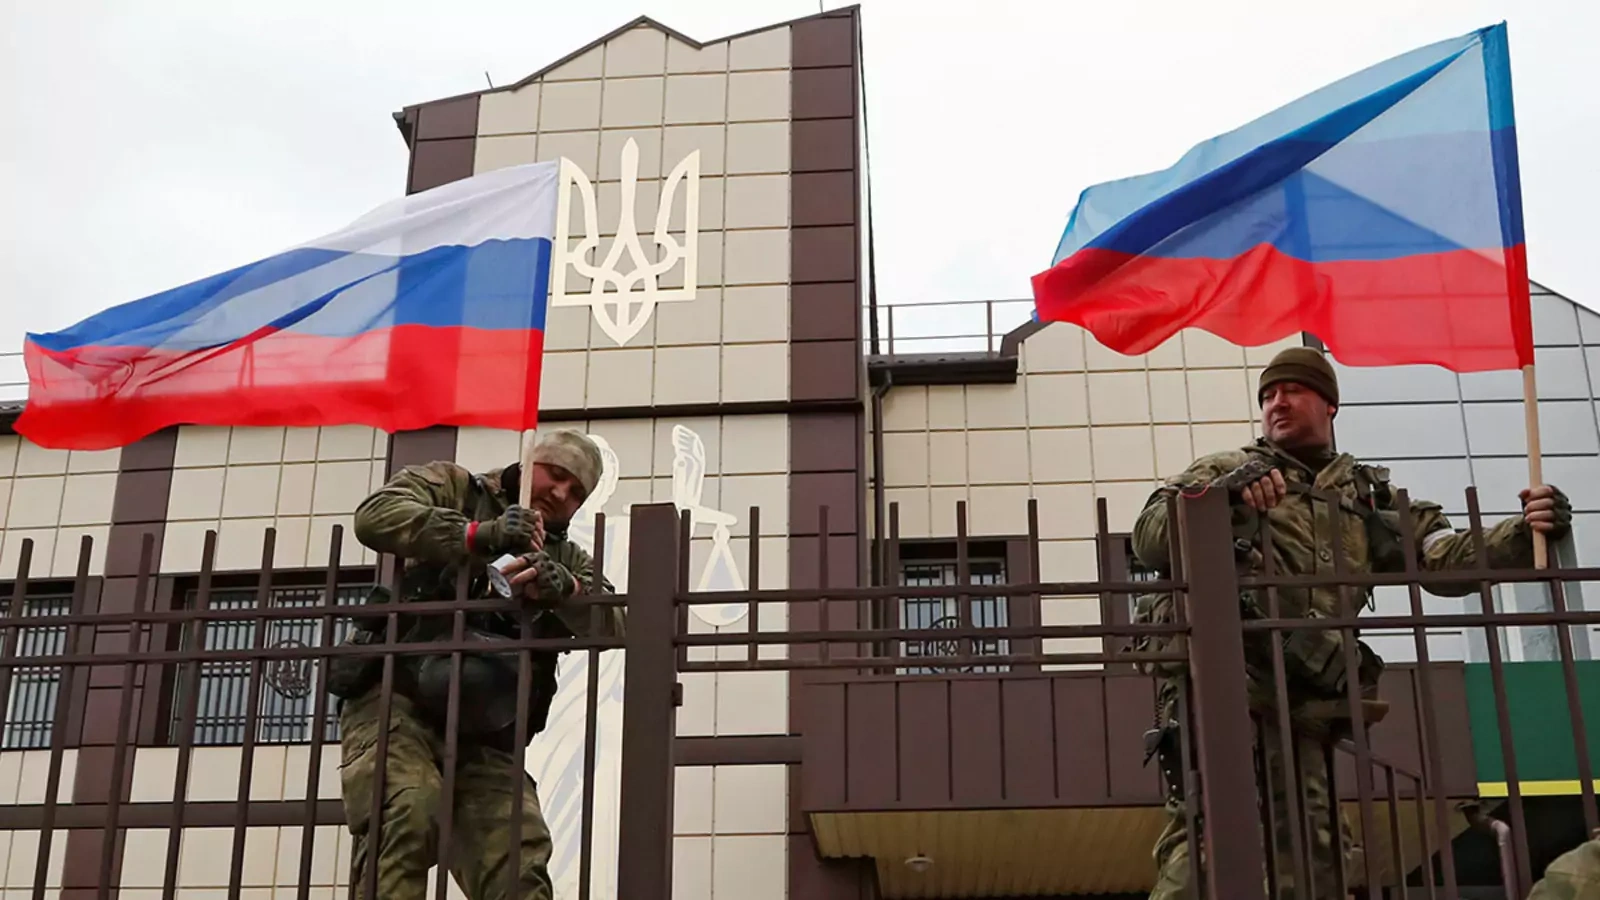 How Russia's international relations and economy are holding up amidst the Ukraine invasion?